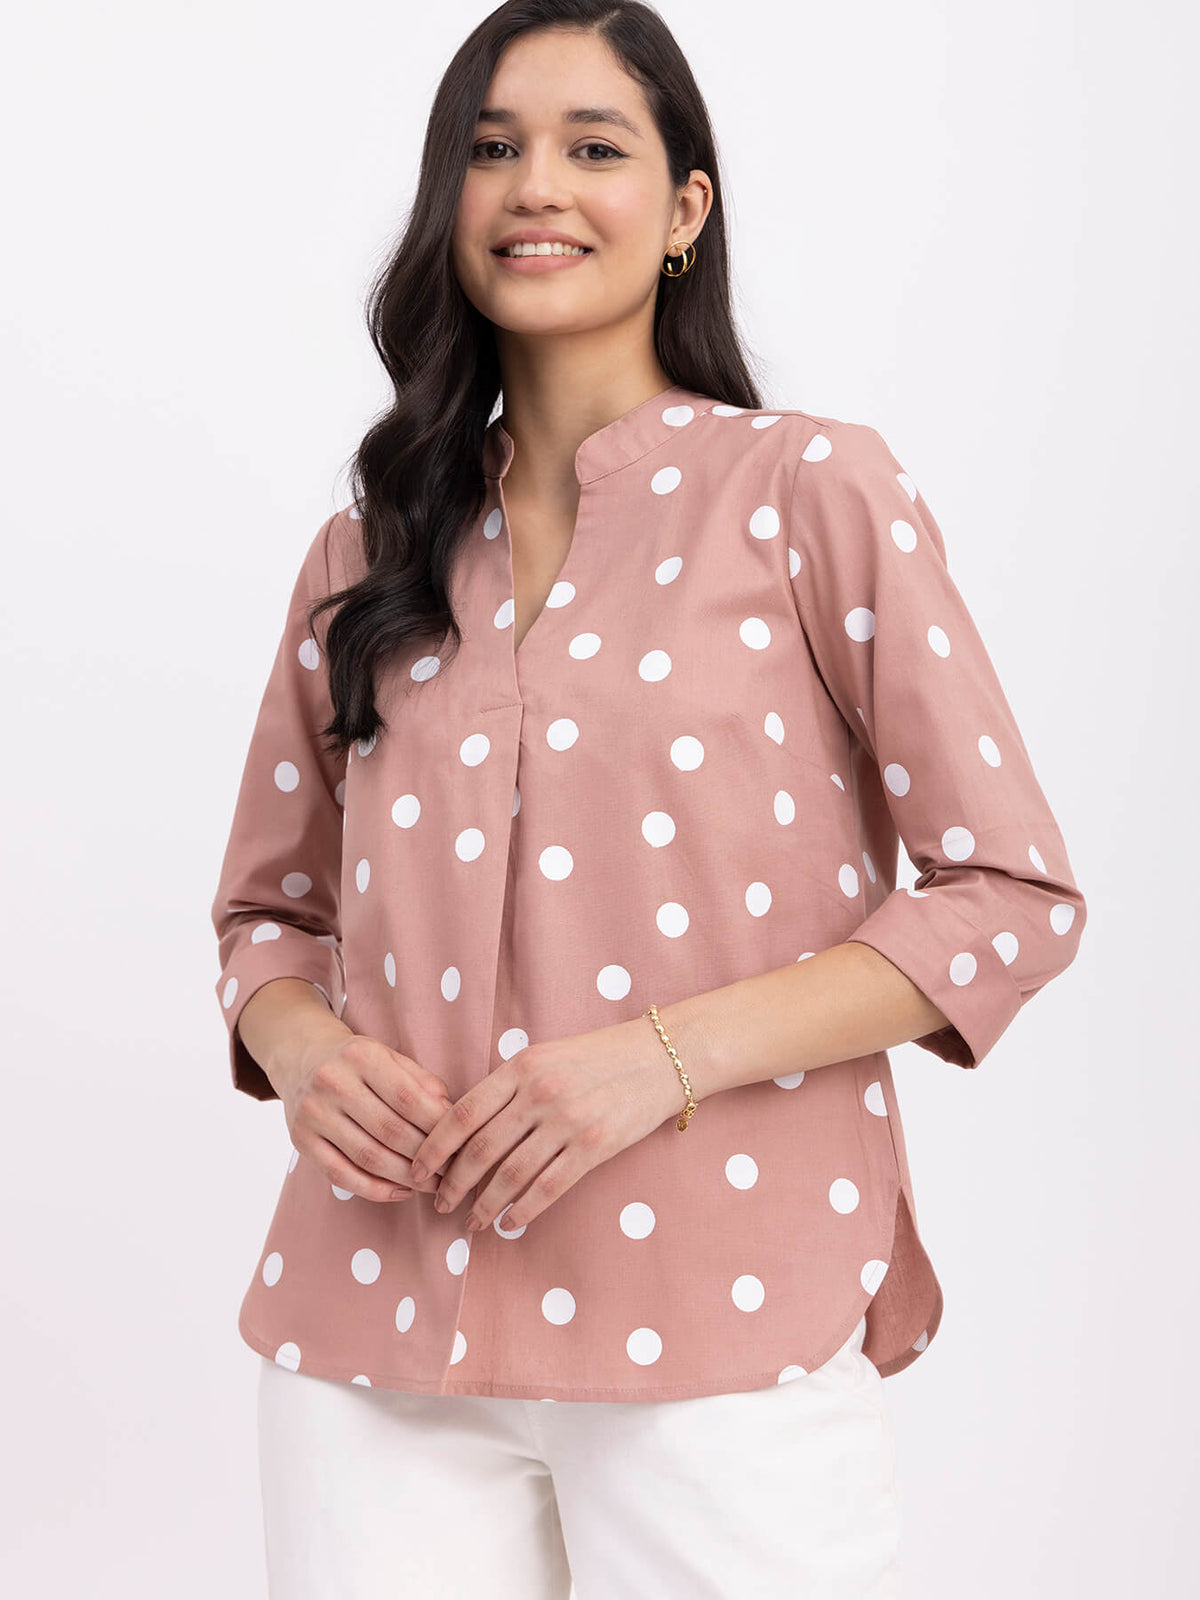 Linen Polka Dot Top - Pink And White